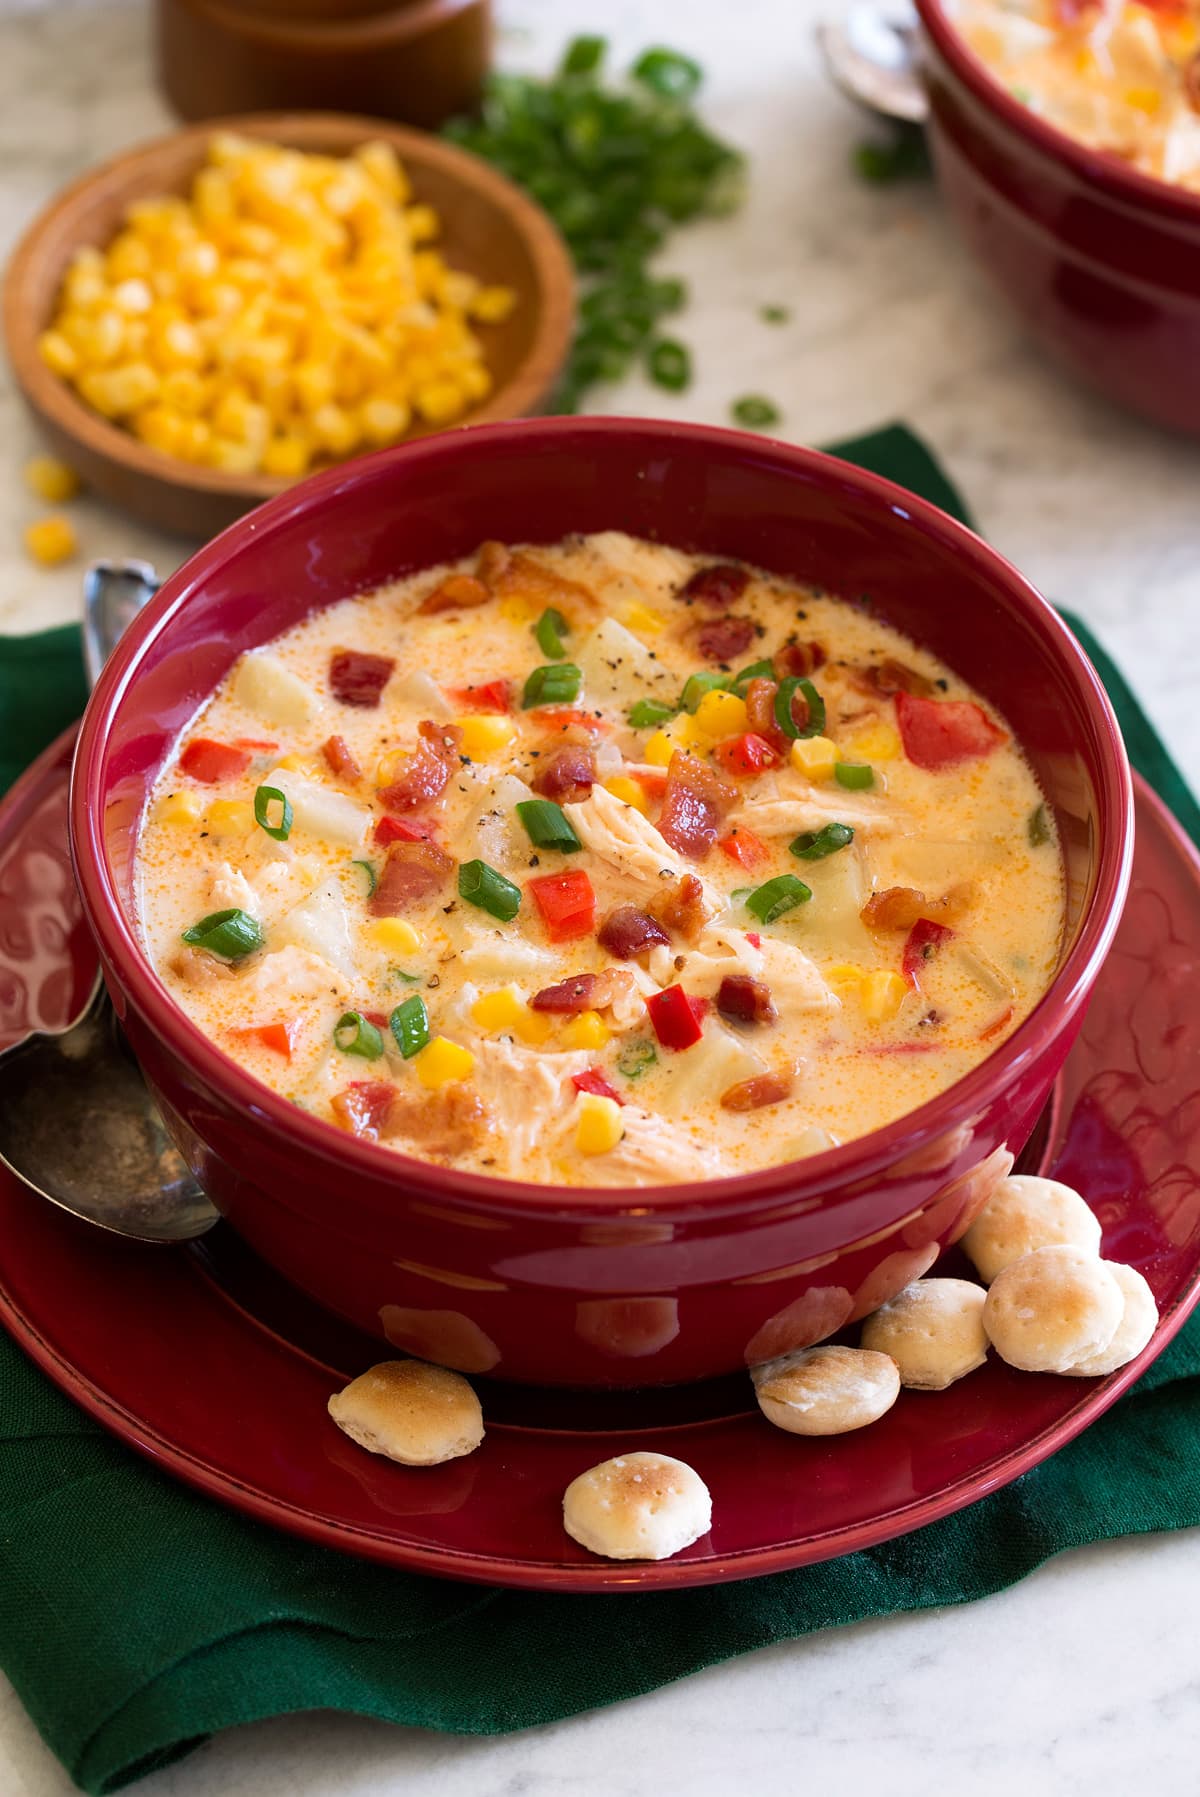 Chicken corn chowder in a serving bowl with oyster crackers to the side.